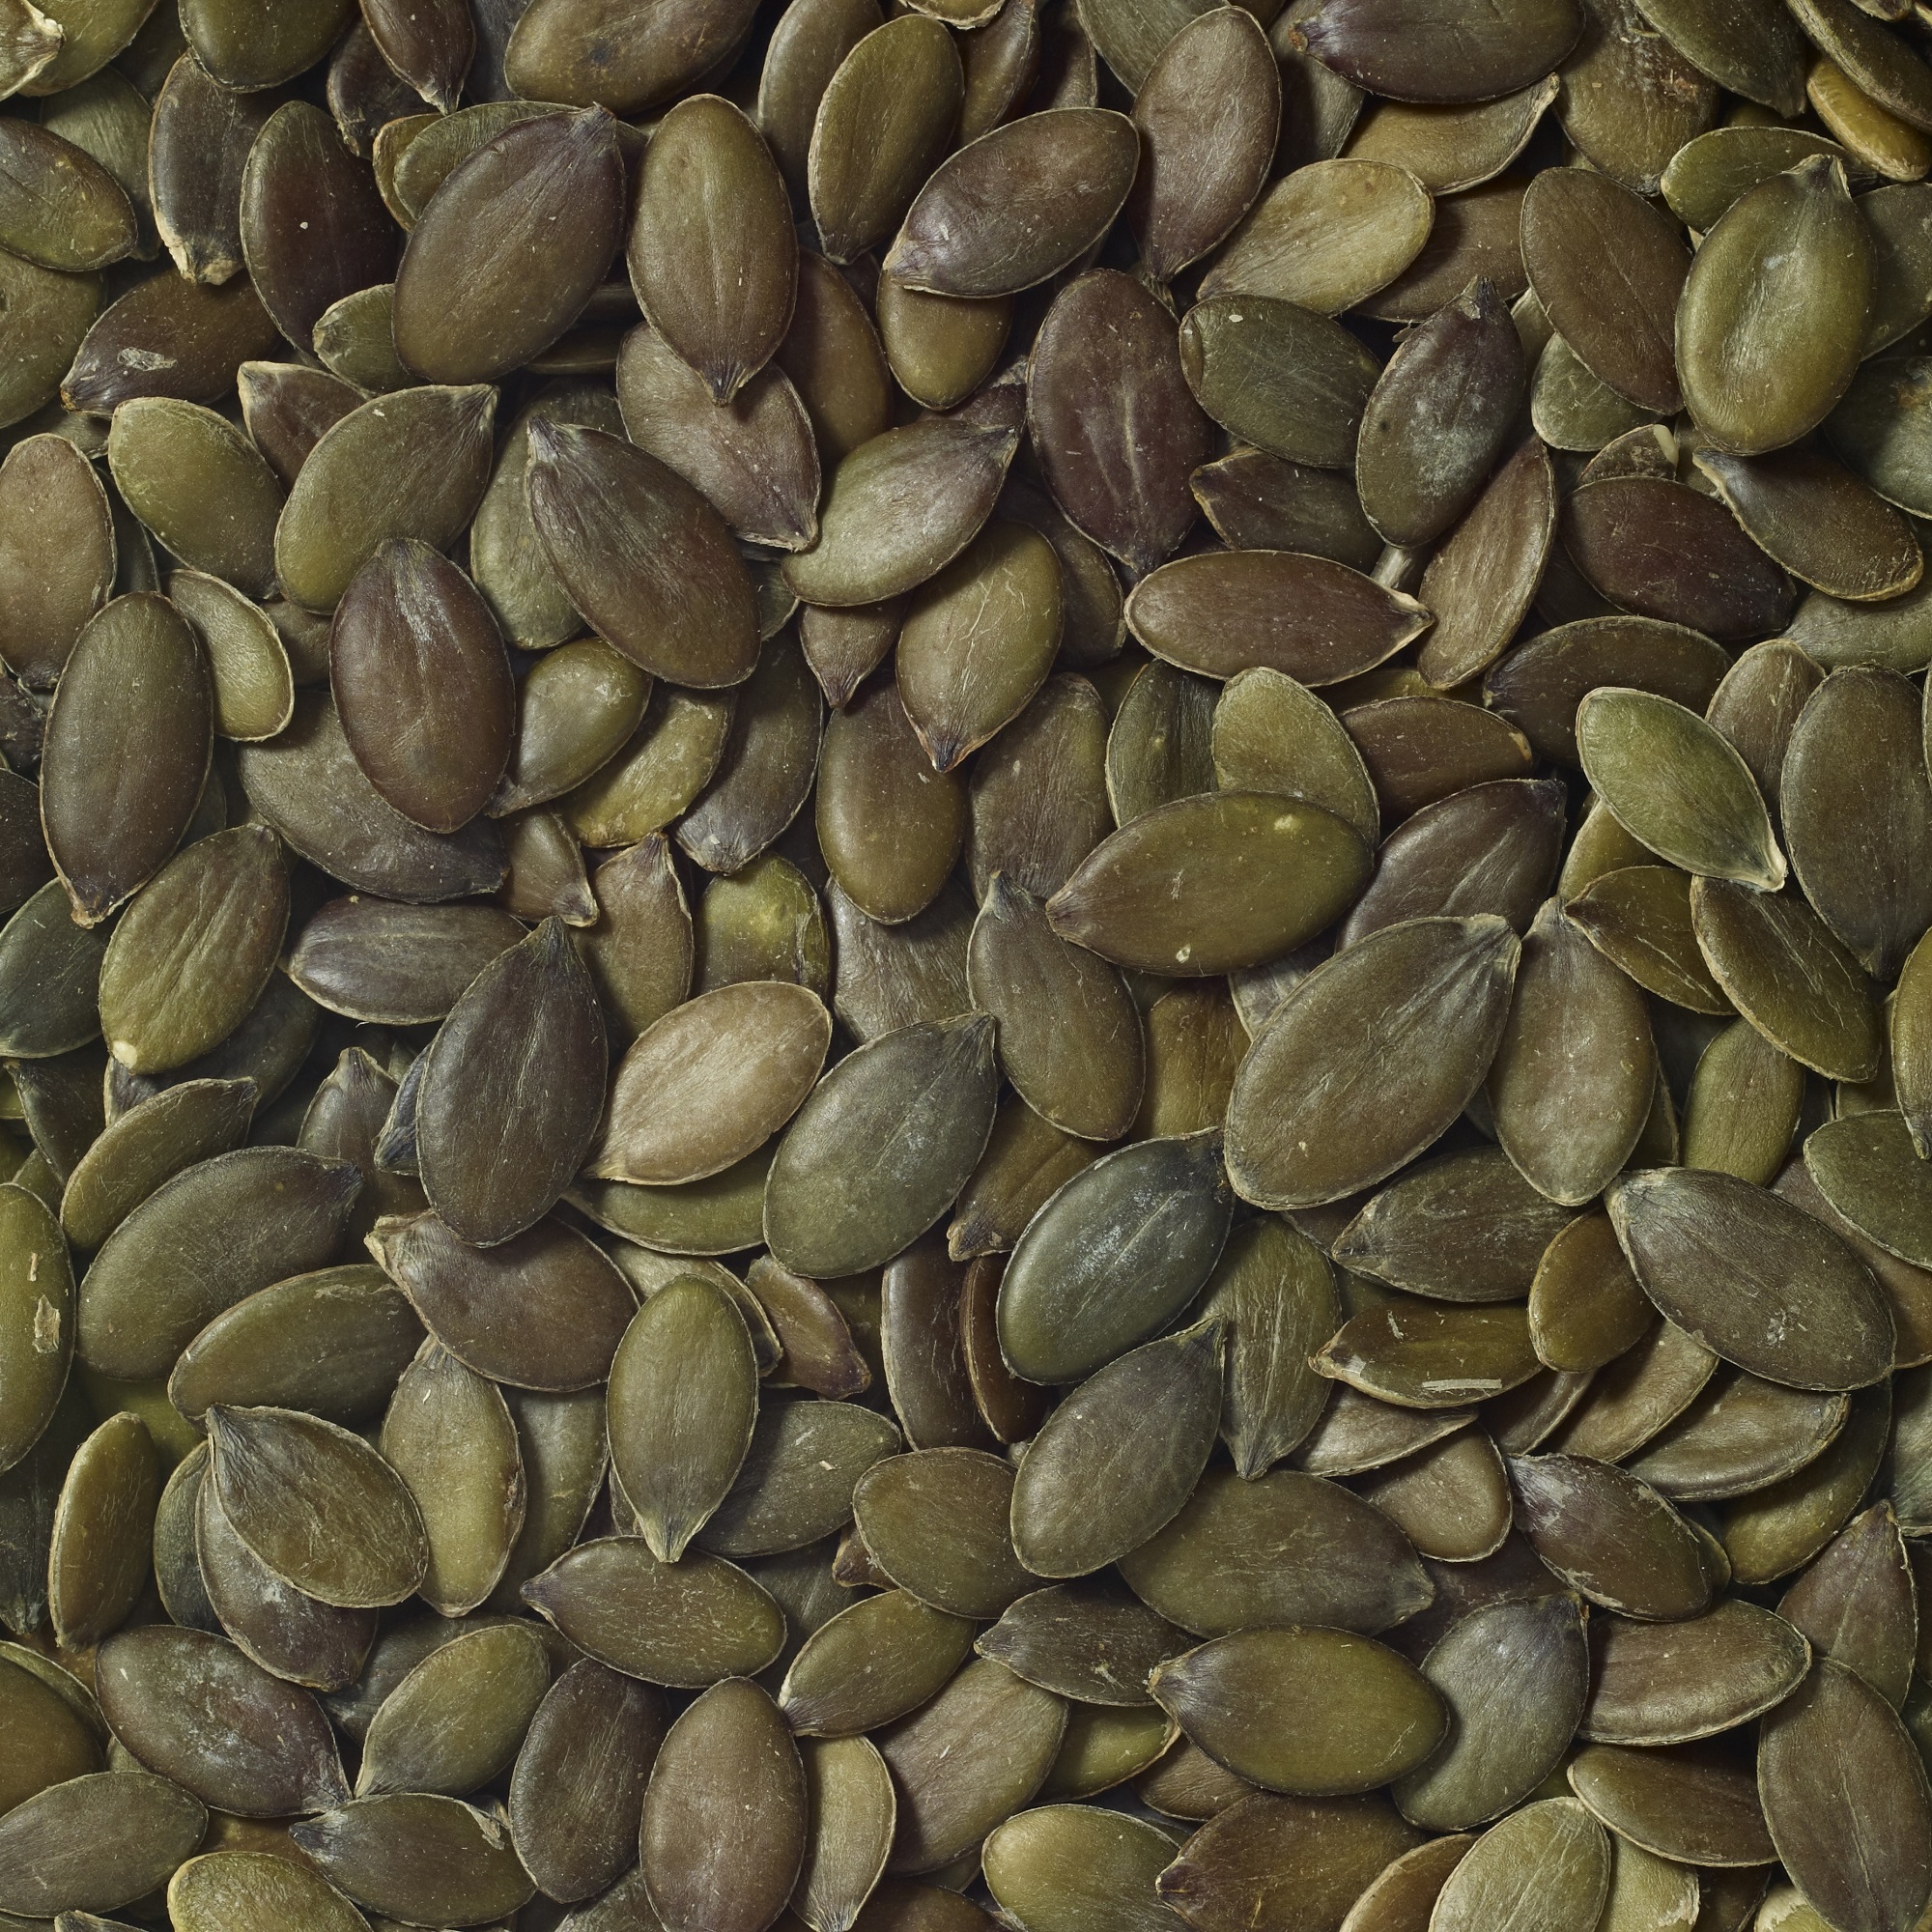 Pumpkinseeds Grown Without Shell